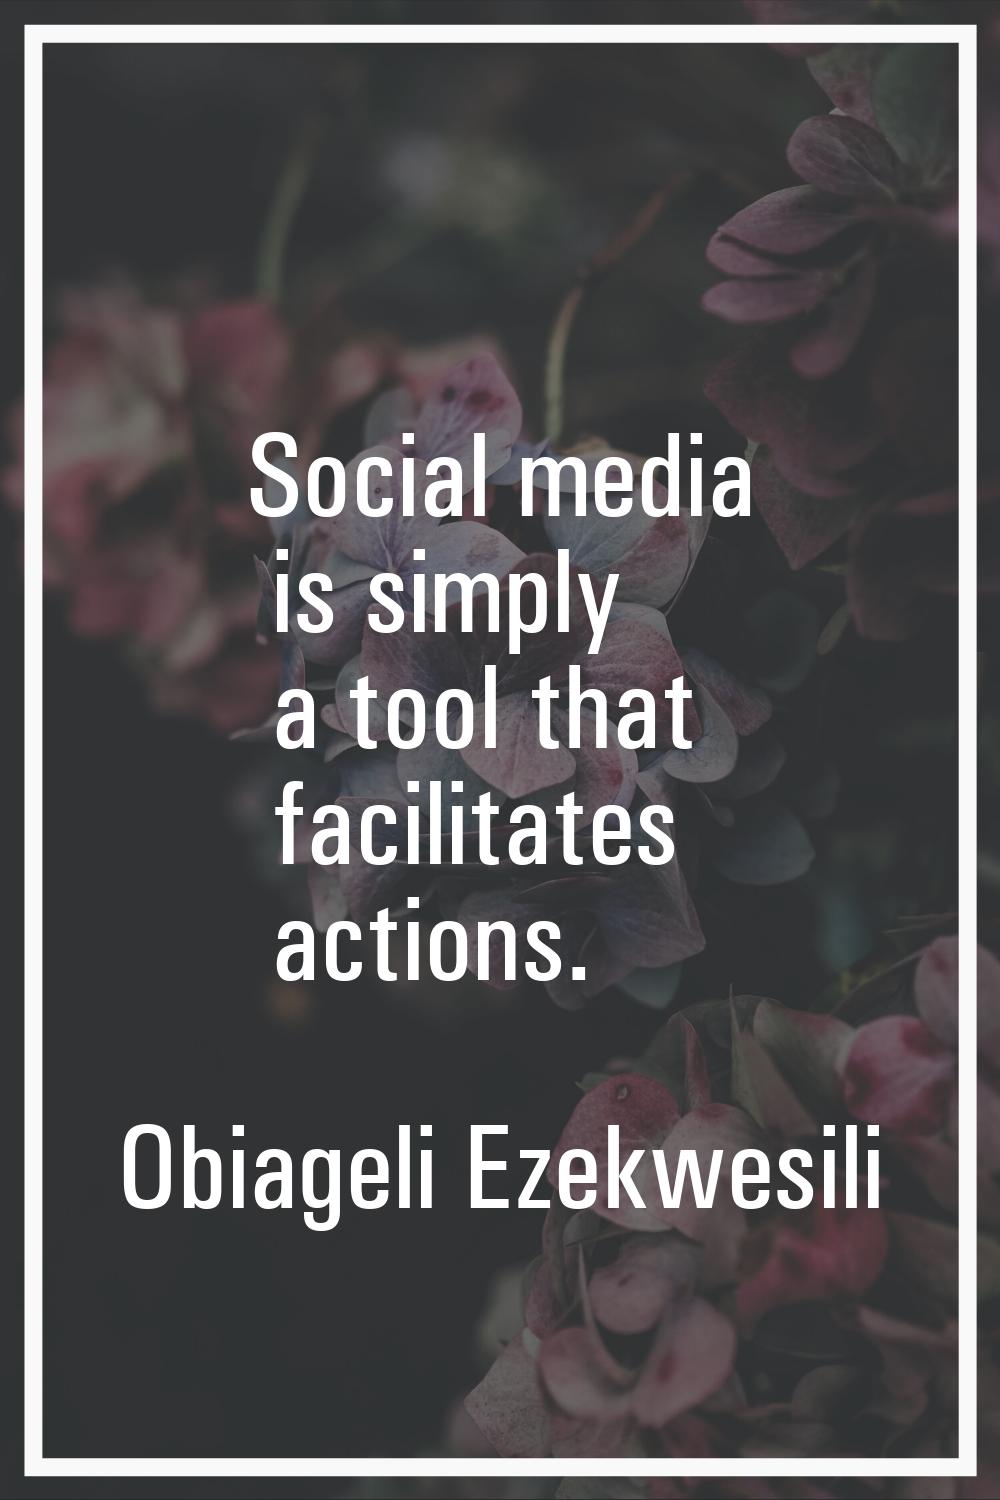 Social media is simply a tool that facilitates actions.